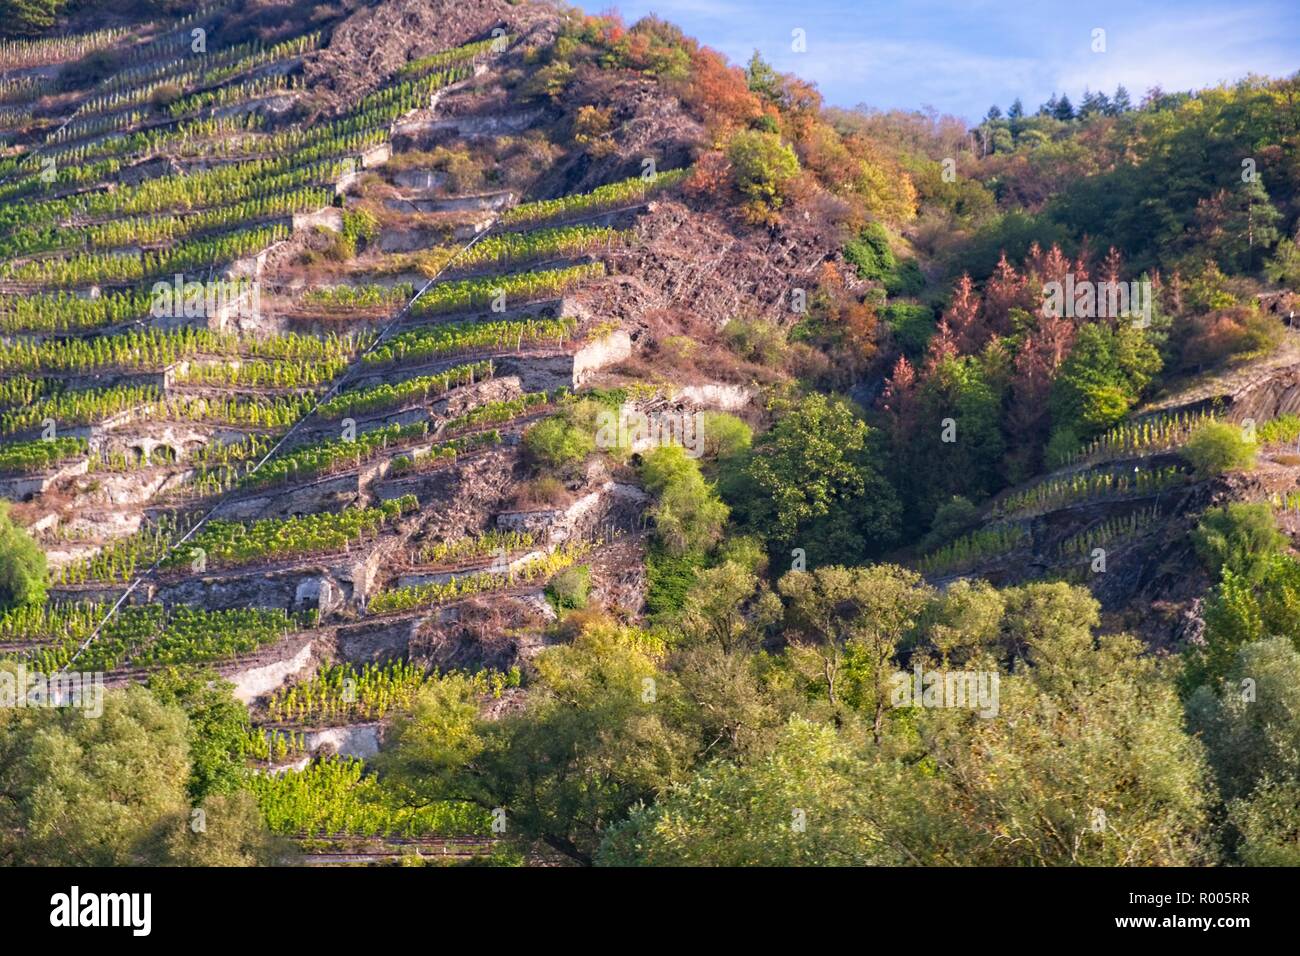 WINNINGEN VINEYARDS AND ROCKY SLOPES THE RIVER MOSEL VALLEY GERMANY Stock Photo